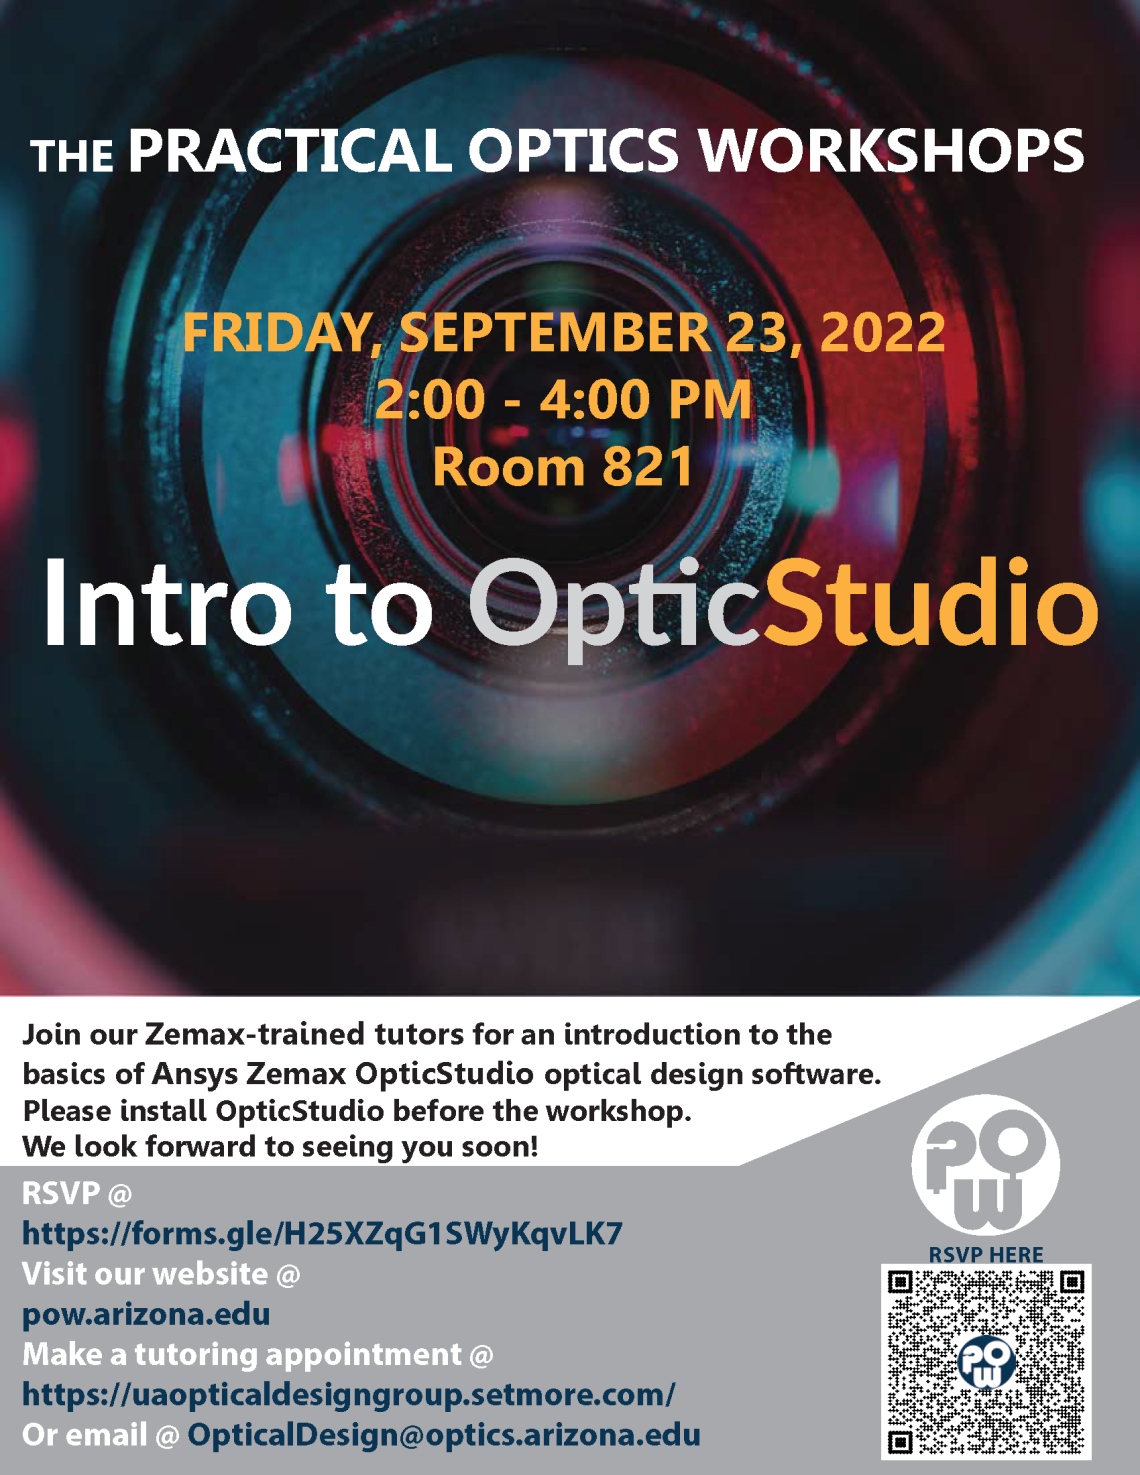 The Practical Optics Workshops   Friday, September 23, 2022 2:00pm - 4:00 pm Room 821 Intro to OpticsStudio         Join our Zemax-trained tutors for an introduction to the basics of Ansys Zemax OpticStudio optical design software. Please install OpticStudio before the workshop. We look forward to seeing you soon!